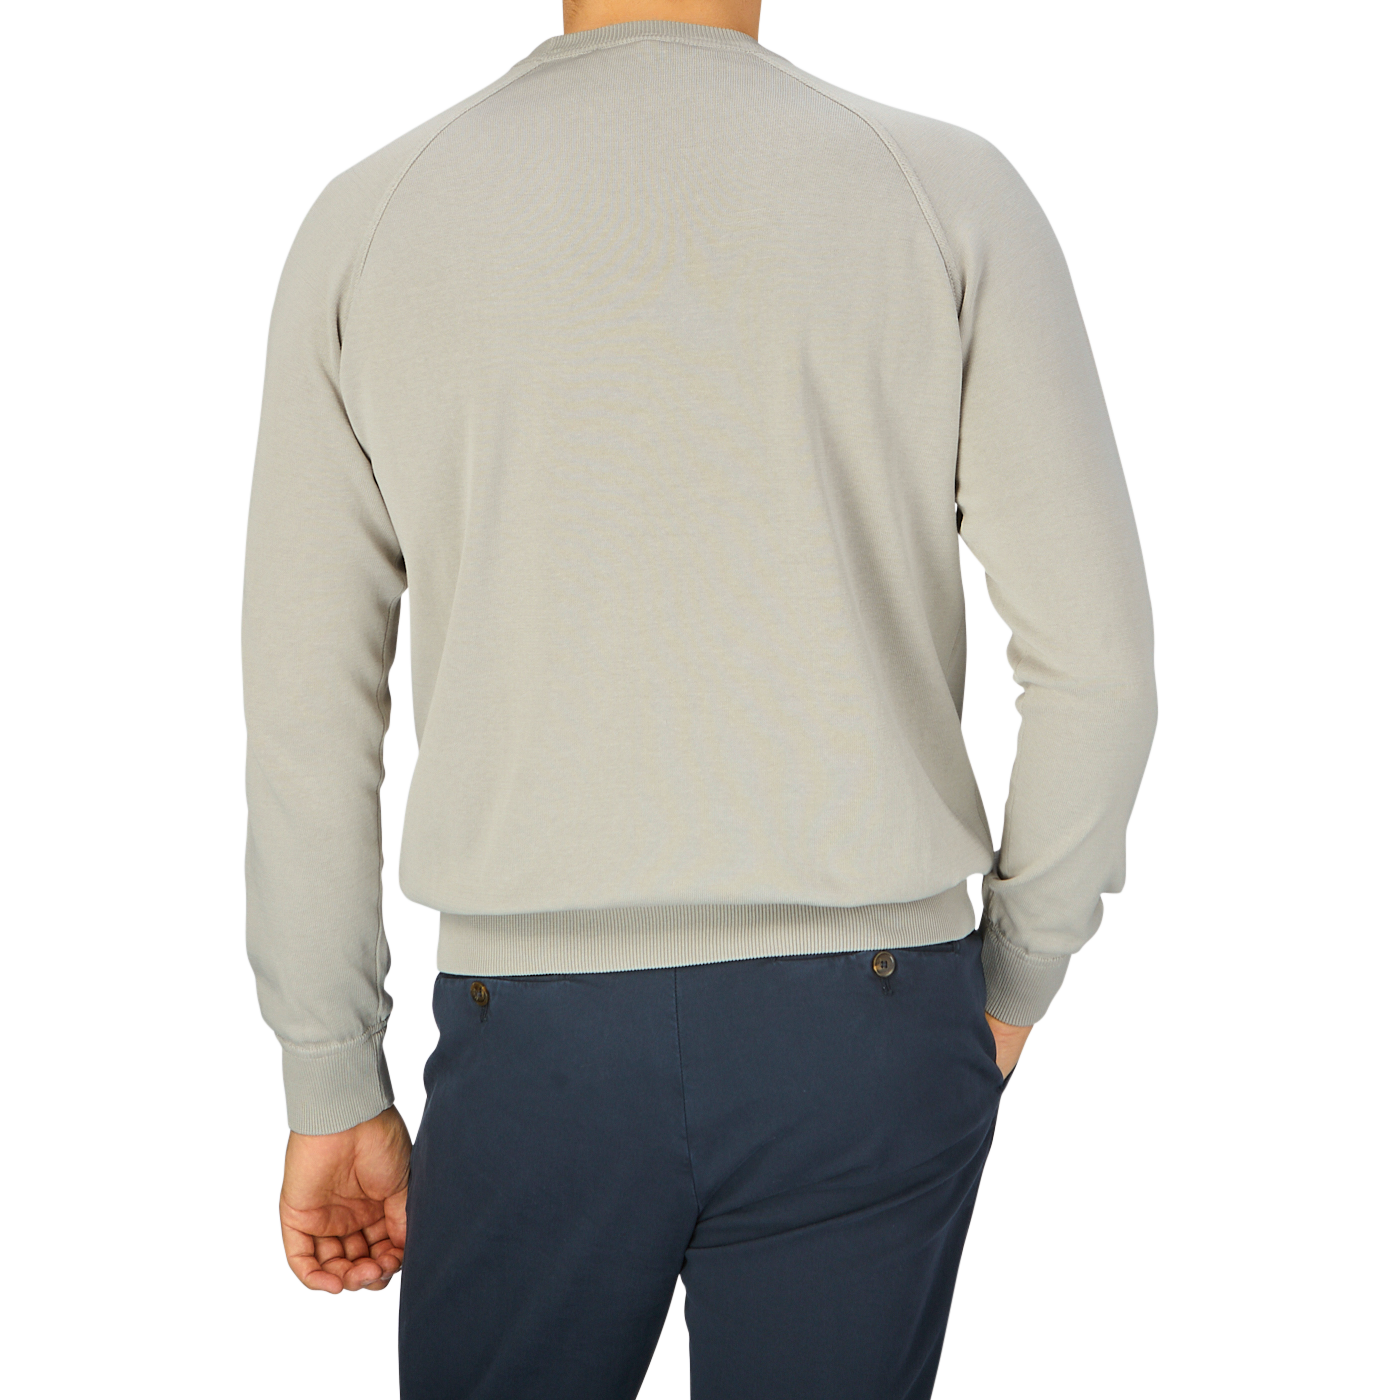 The back view of a man wearing a Filippo de Laurentiis Nebbia Grey Crepe Cotton Crew Neck Sweater.